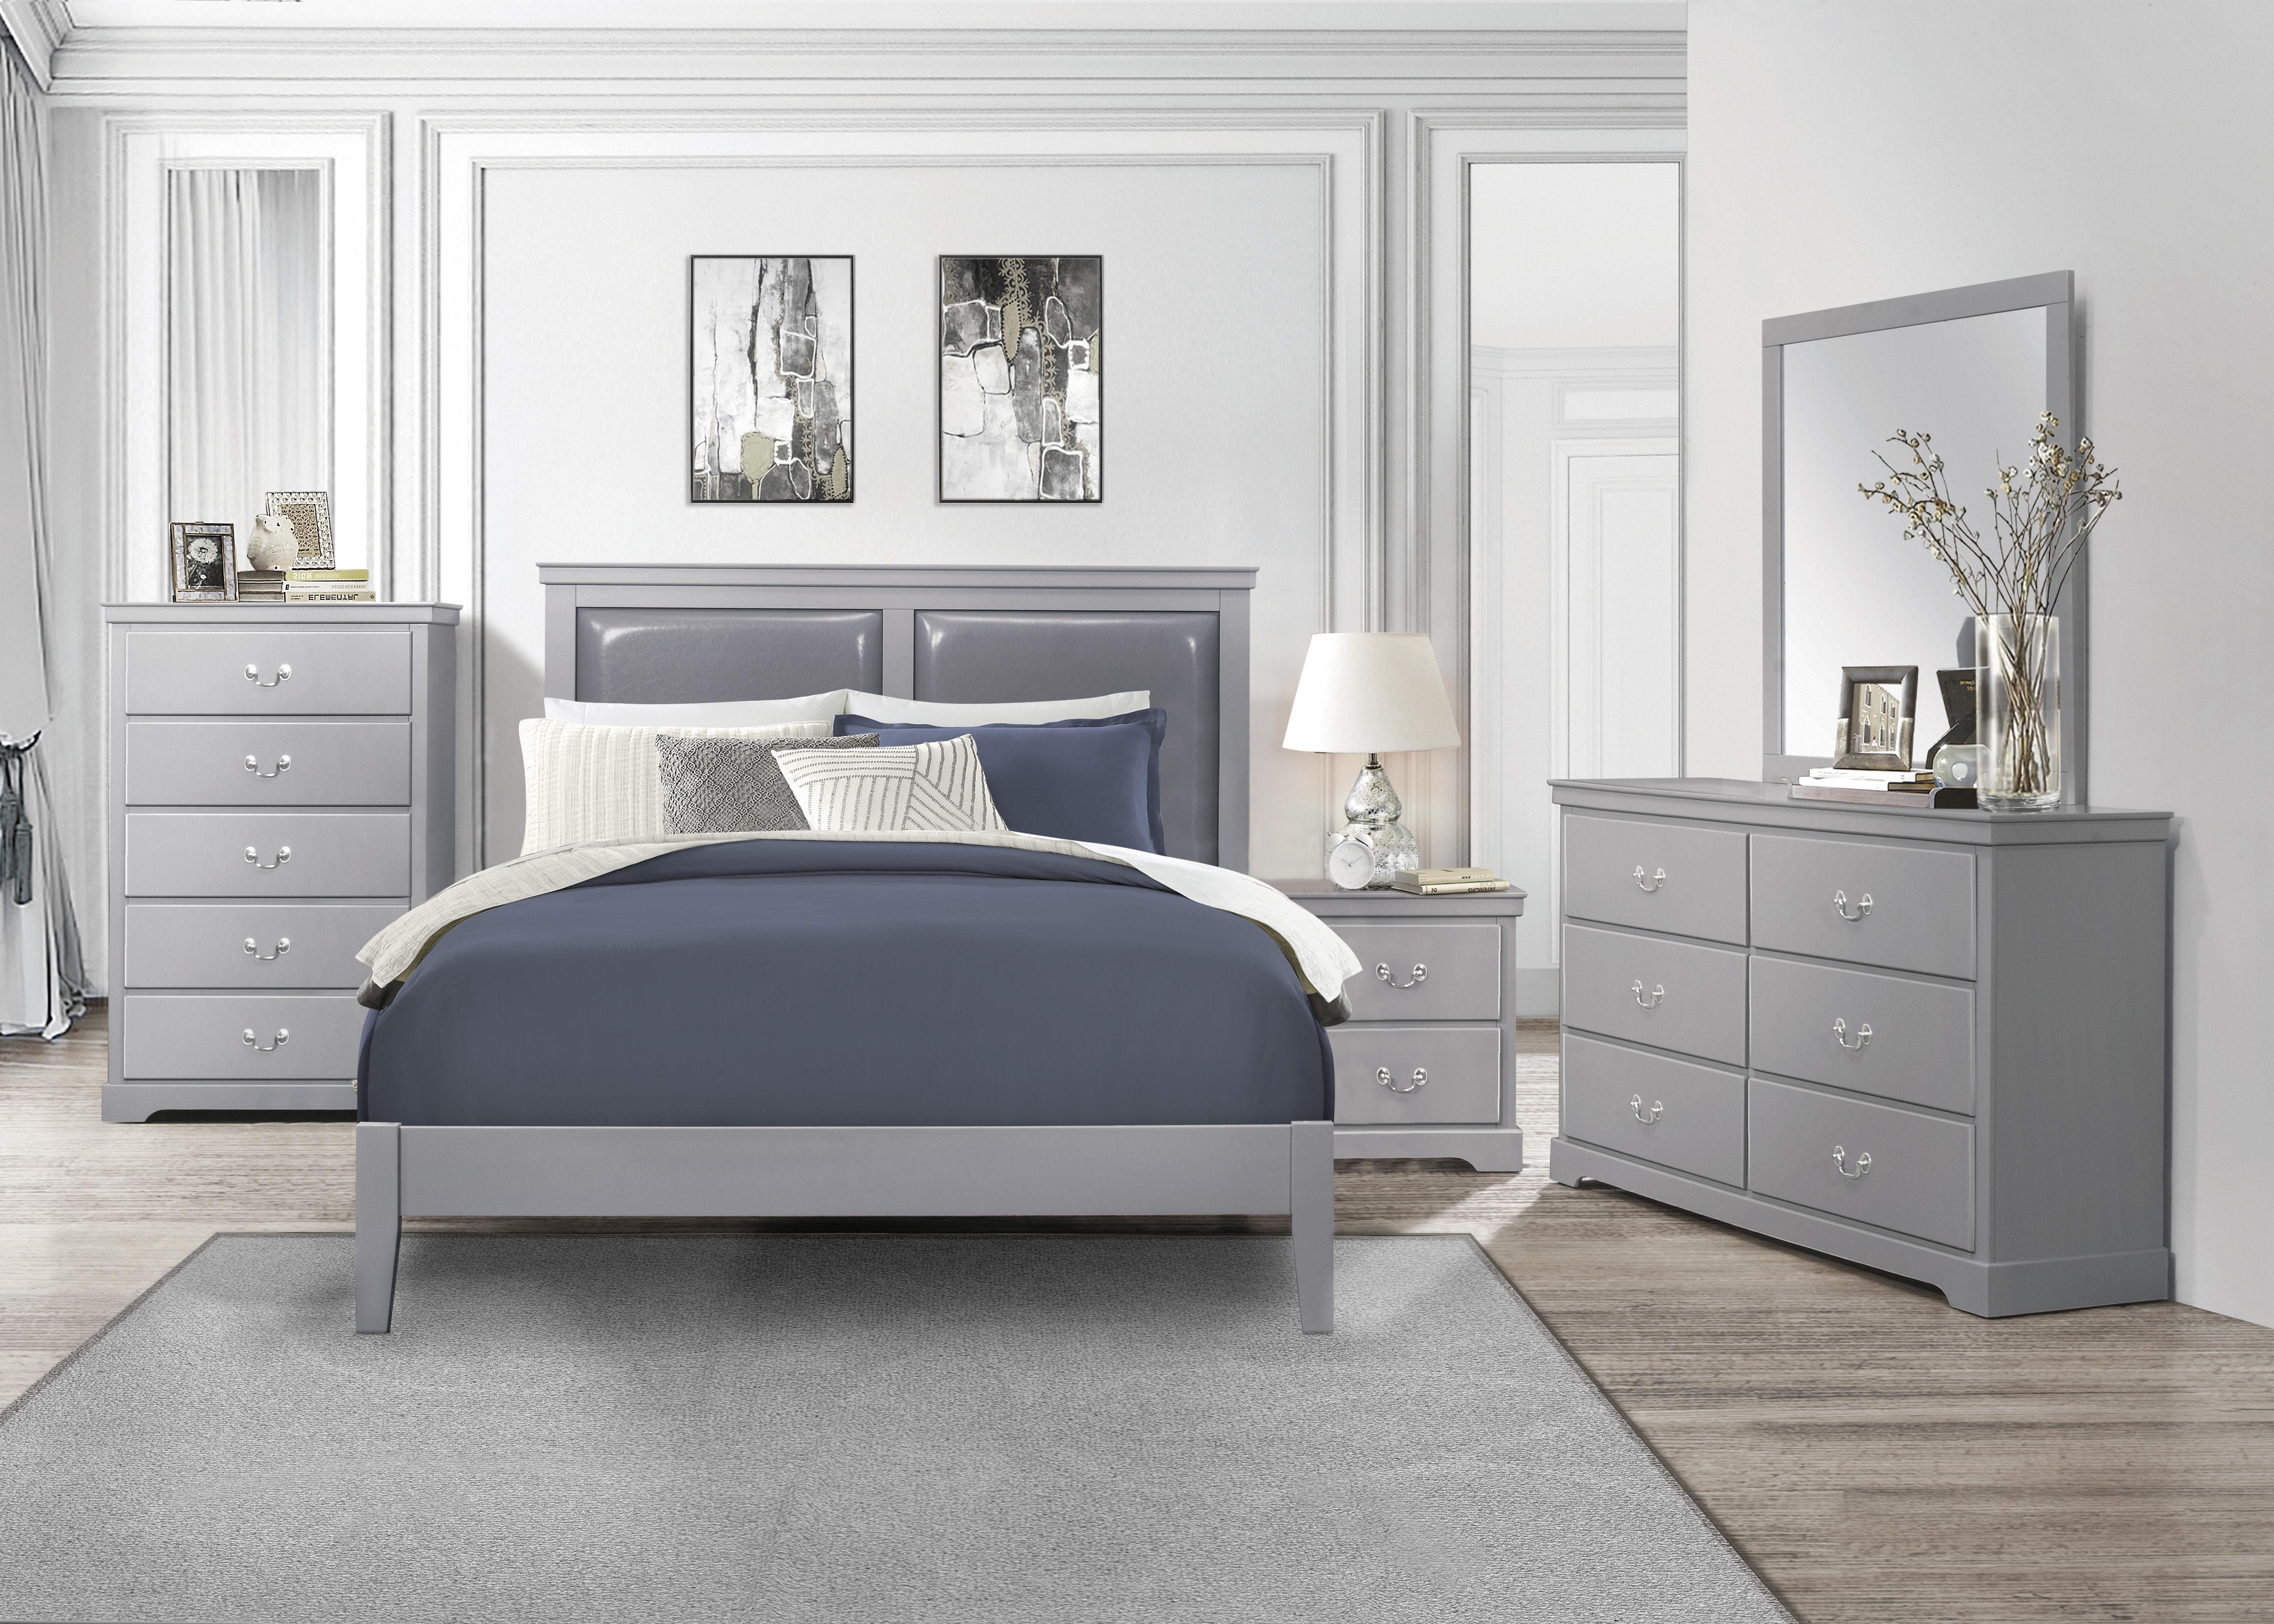 Modern Bedroom Set 1519GY-1-5PC Seabright 1519GY-1-5PC in Gray Faux Leather